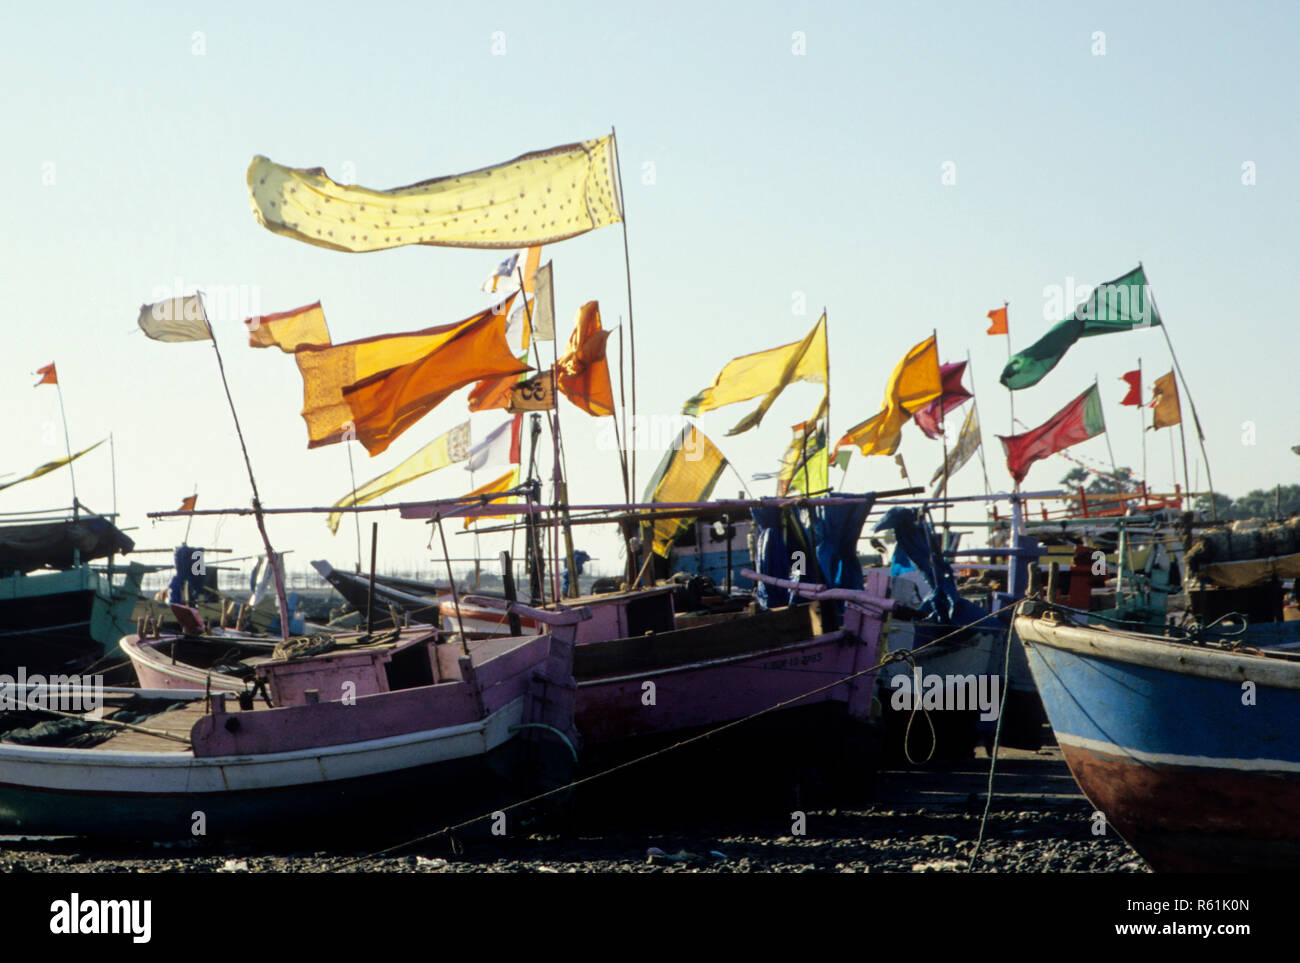 Fishing boats with colorful flags, manori across marve, malad, india Stock Photo